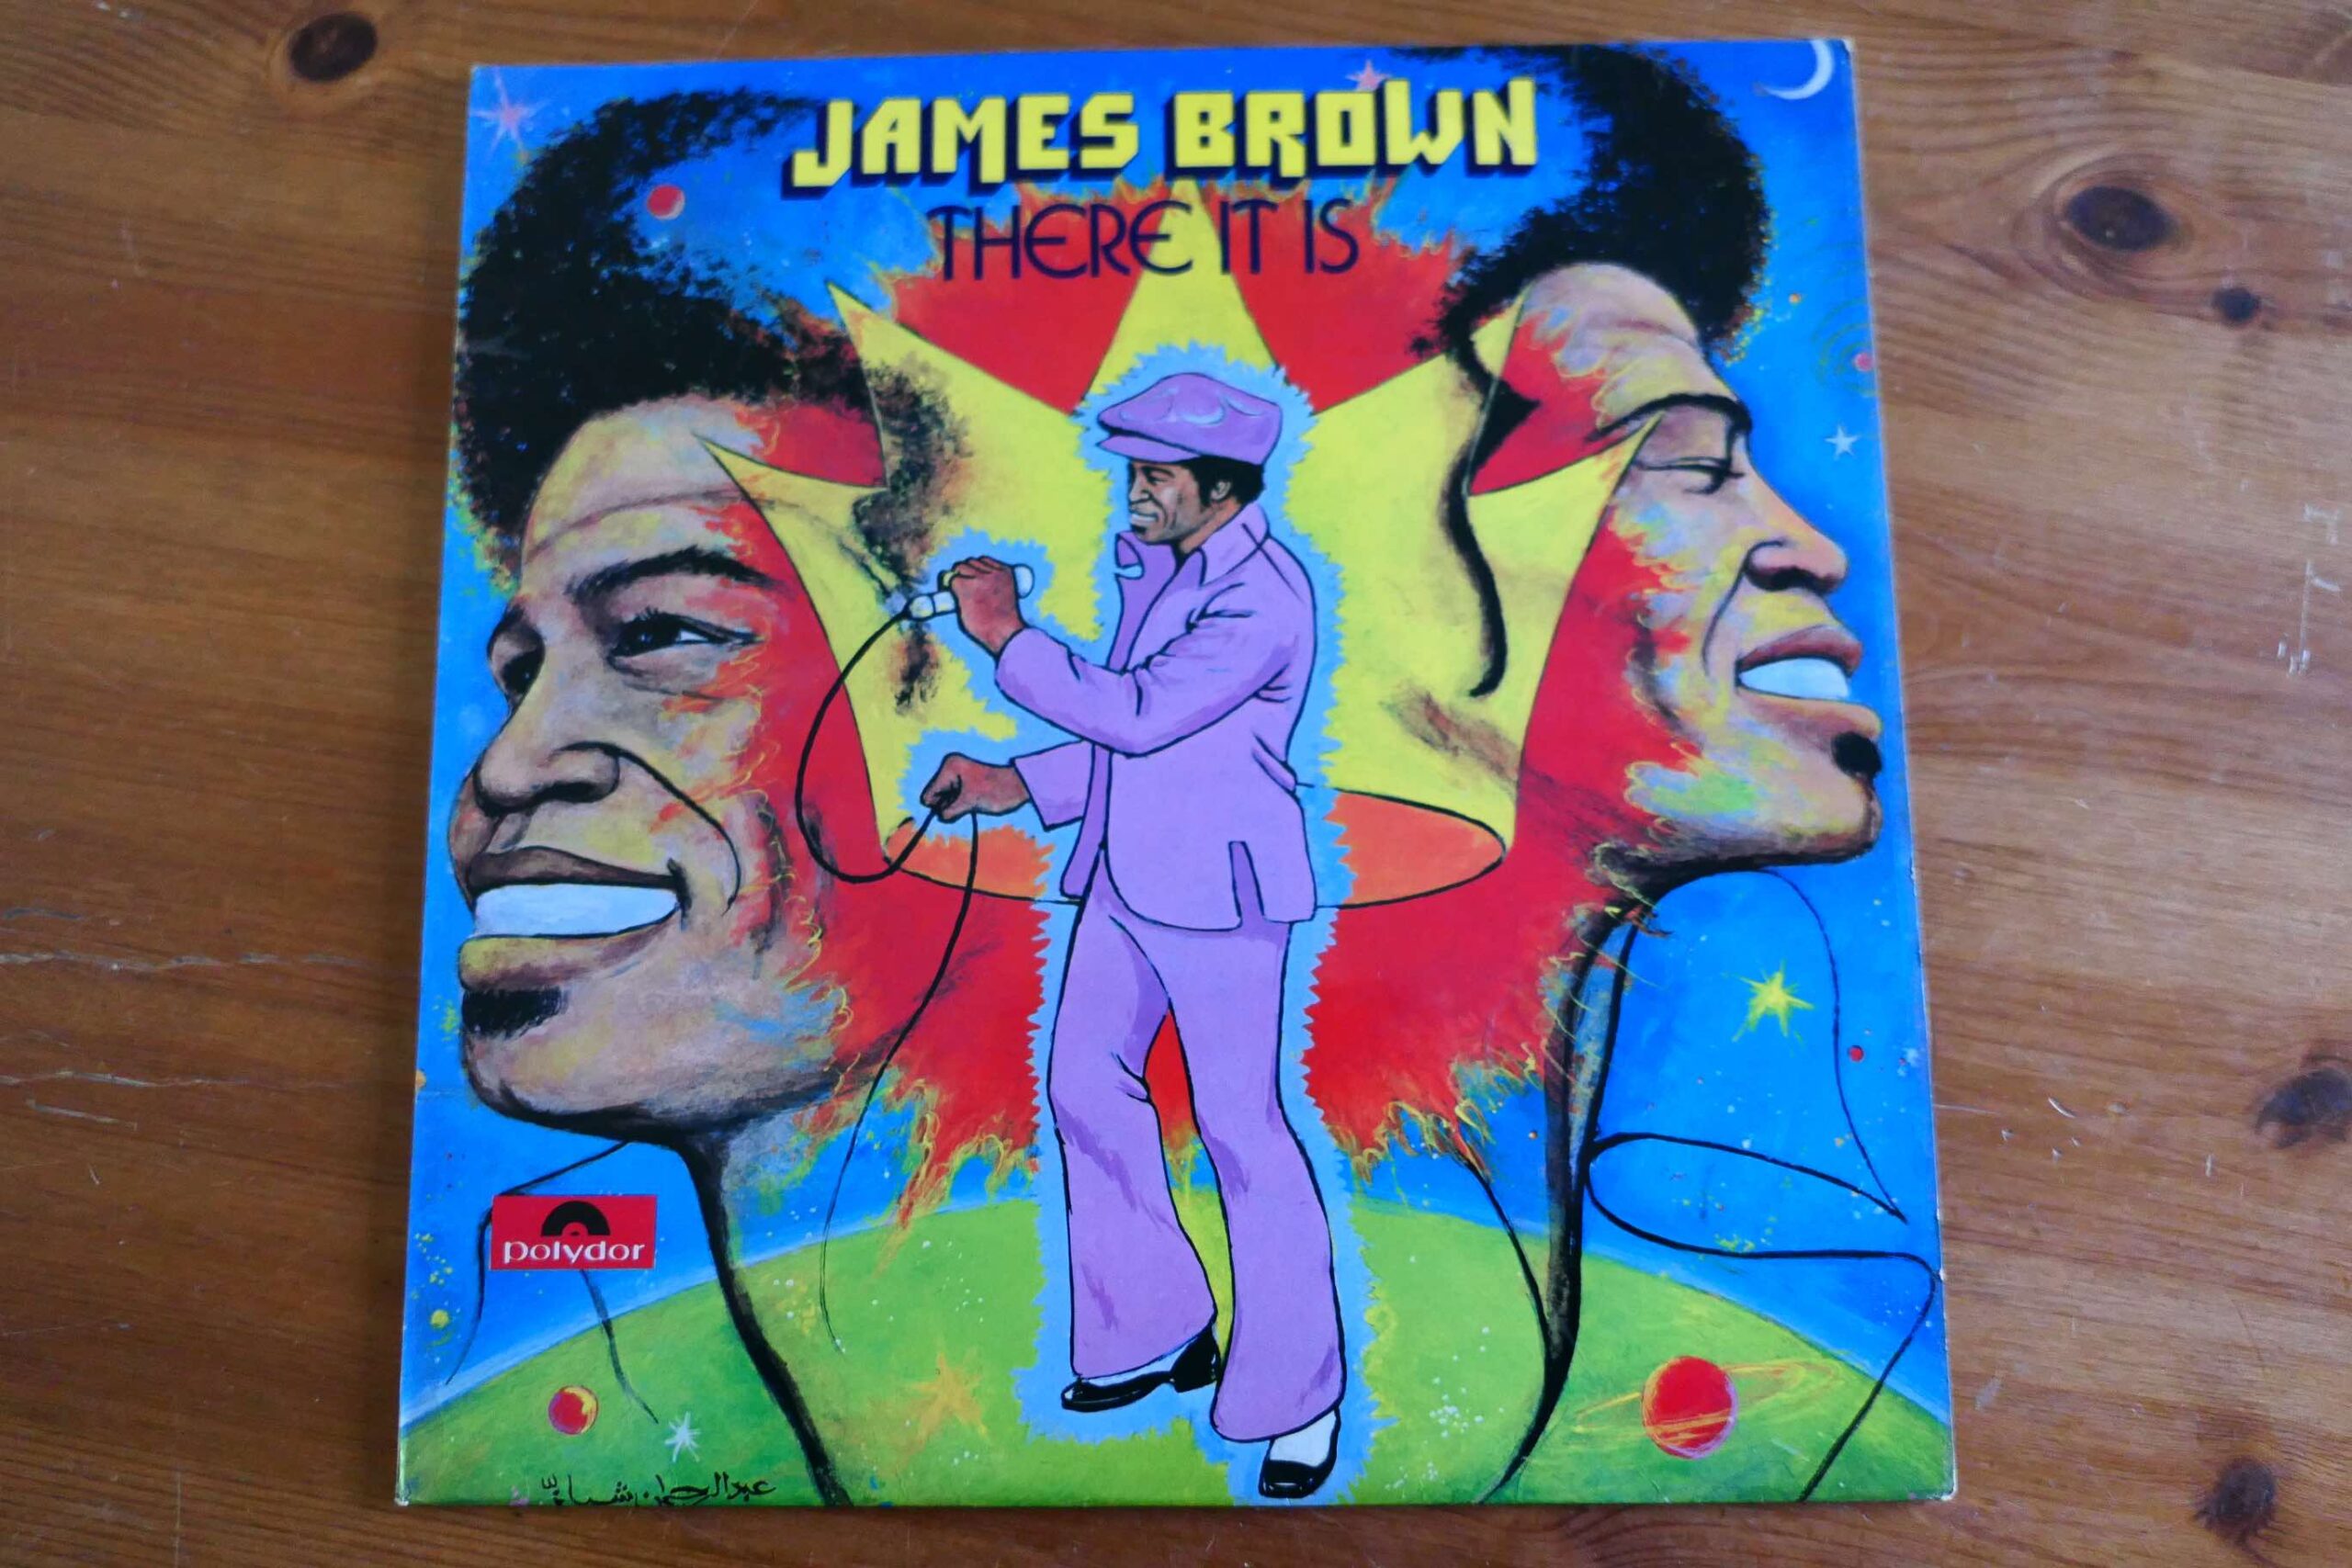 JAMES BROWN - THERE IT IS LP - Nr MINT UK 1972 FUNK SOUL